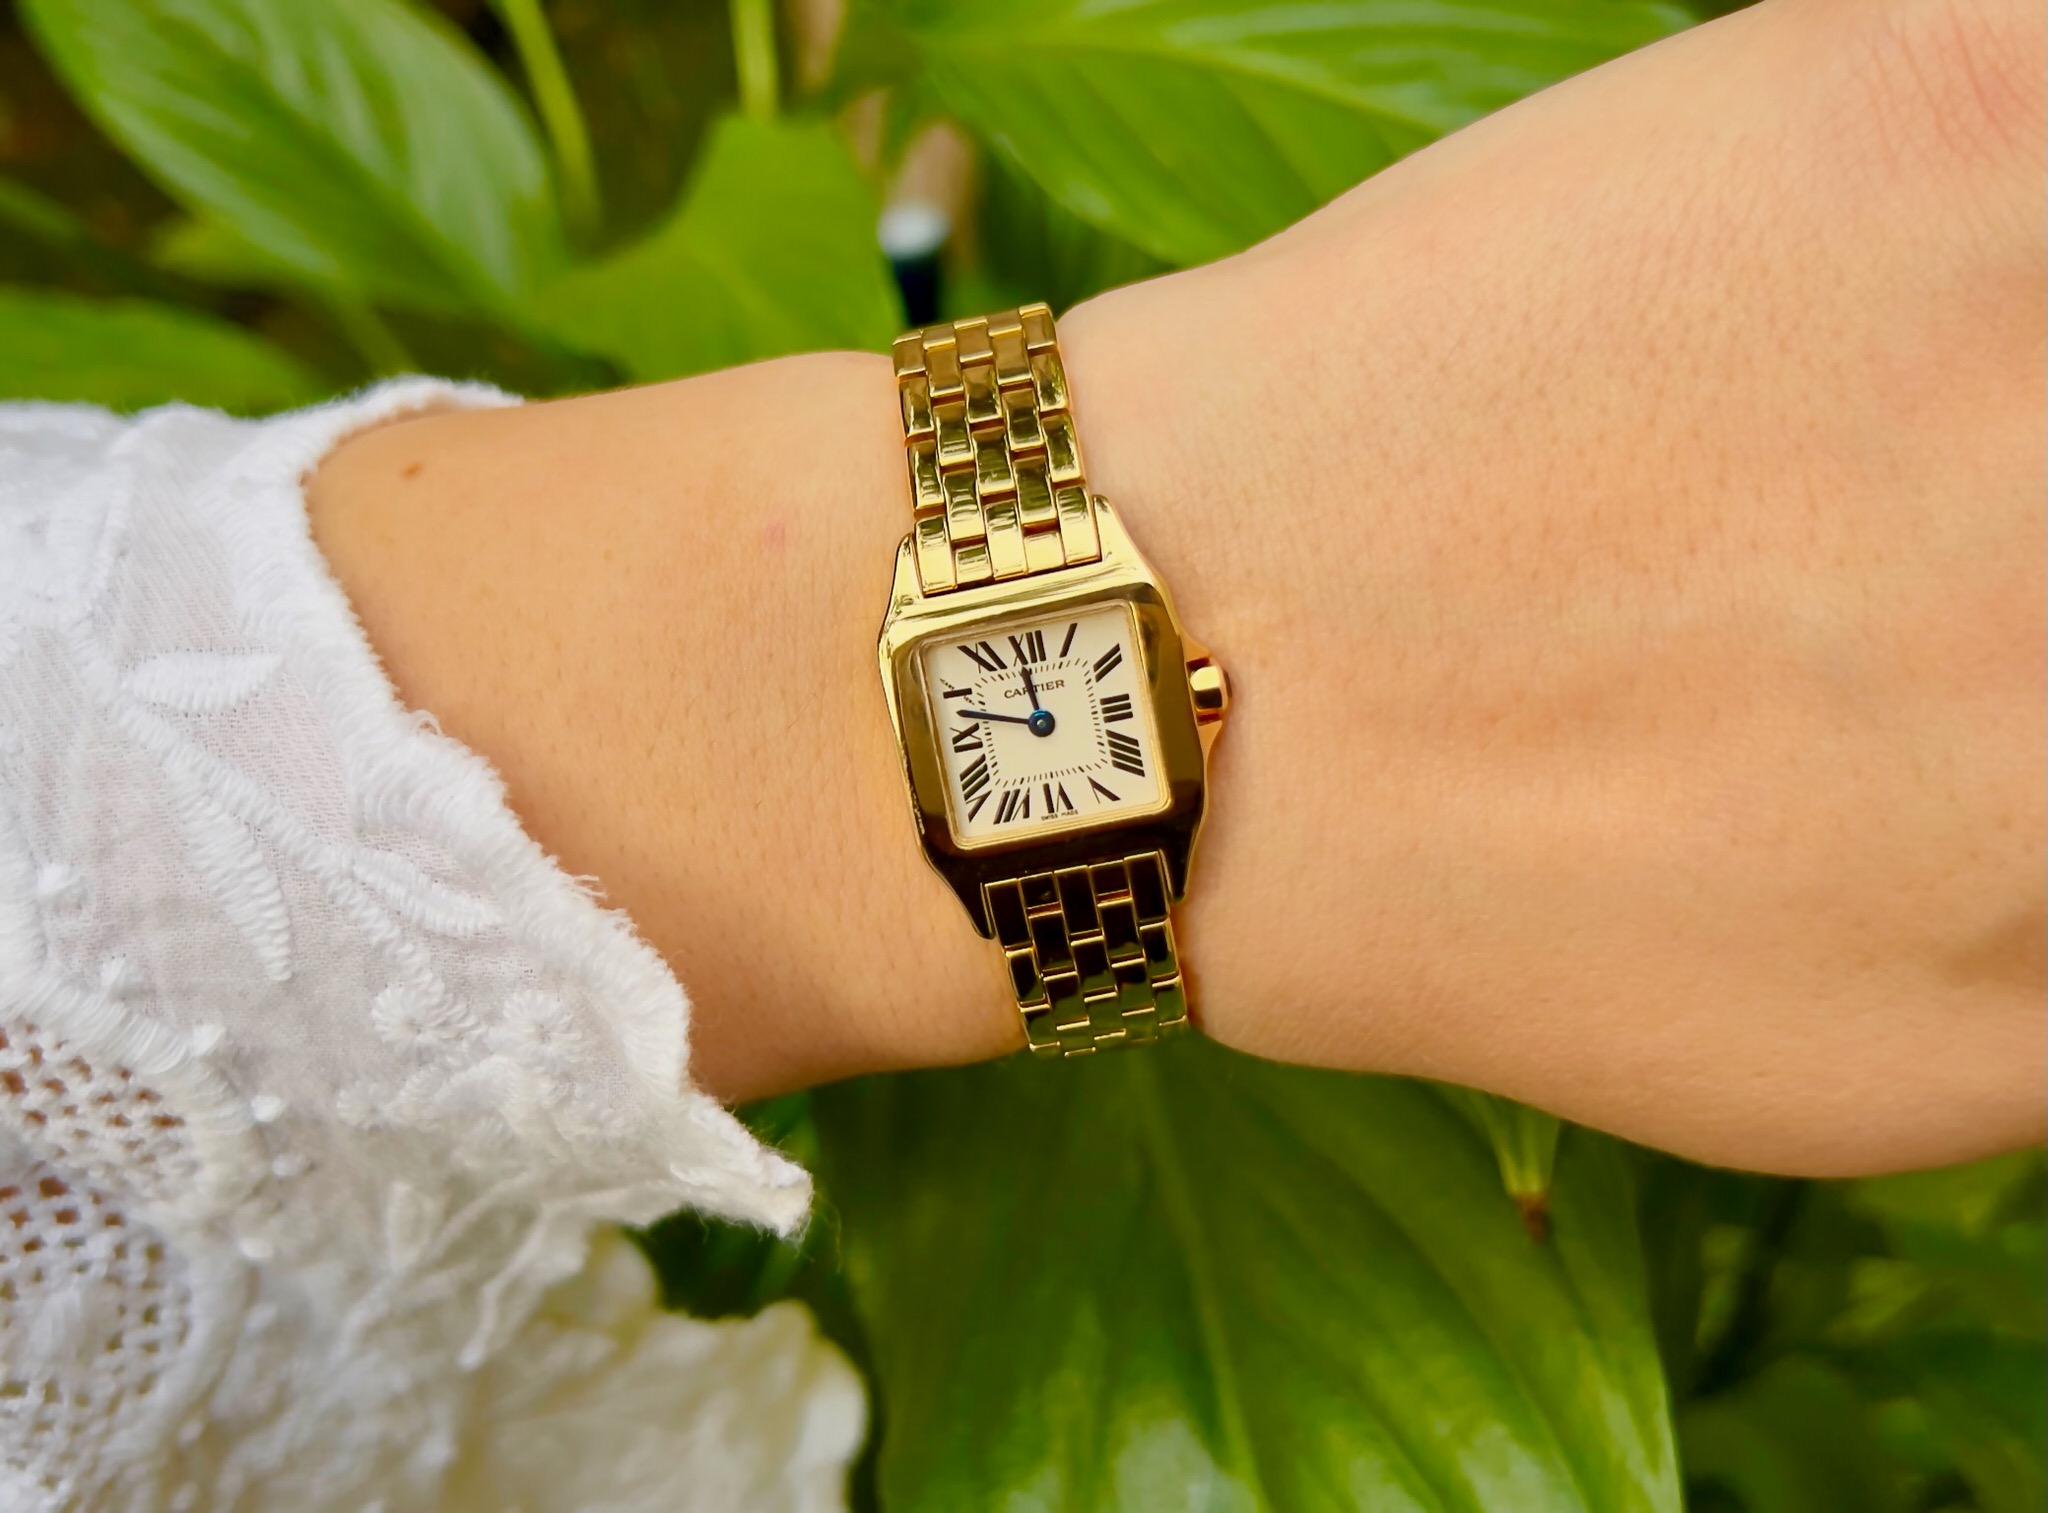 Brand: Cartier
Collection: Santos Demoiselle
Model: 2699
It comes with the Original Box & Appraisal by GIA GG/AJP
Metal: 18K Yellow Gold
Band Length: 6 inches